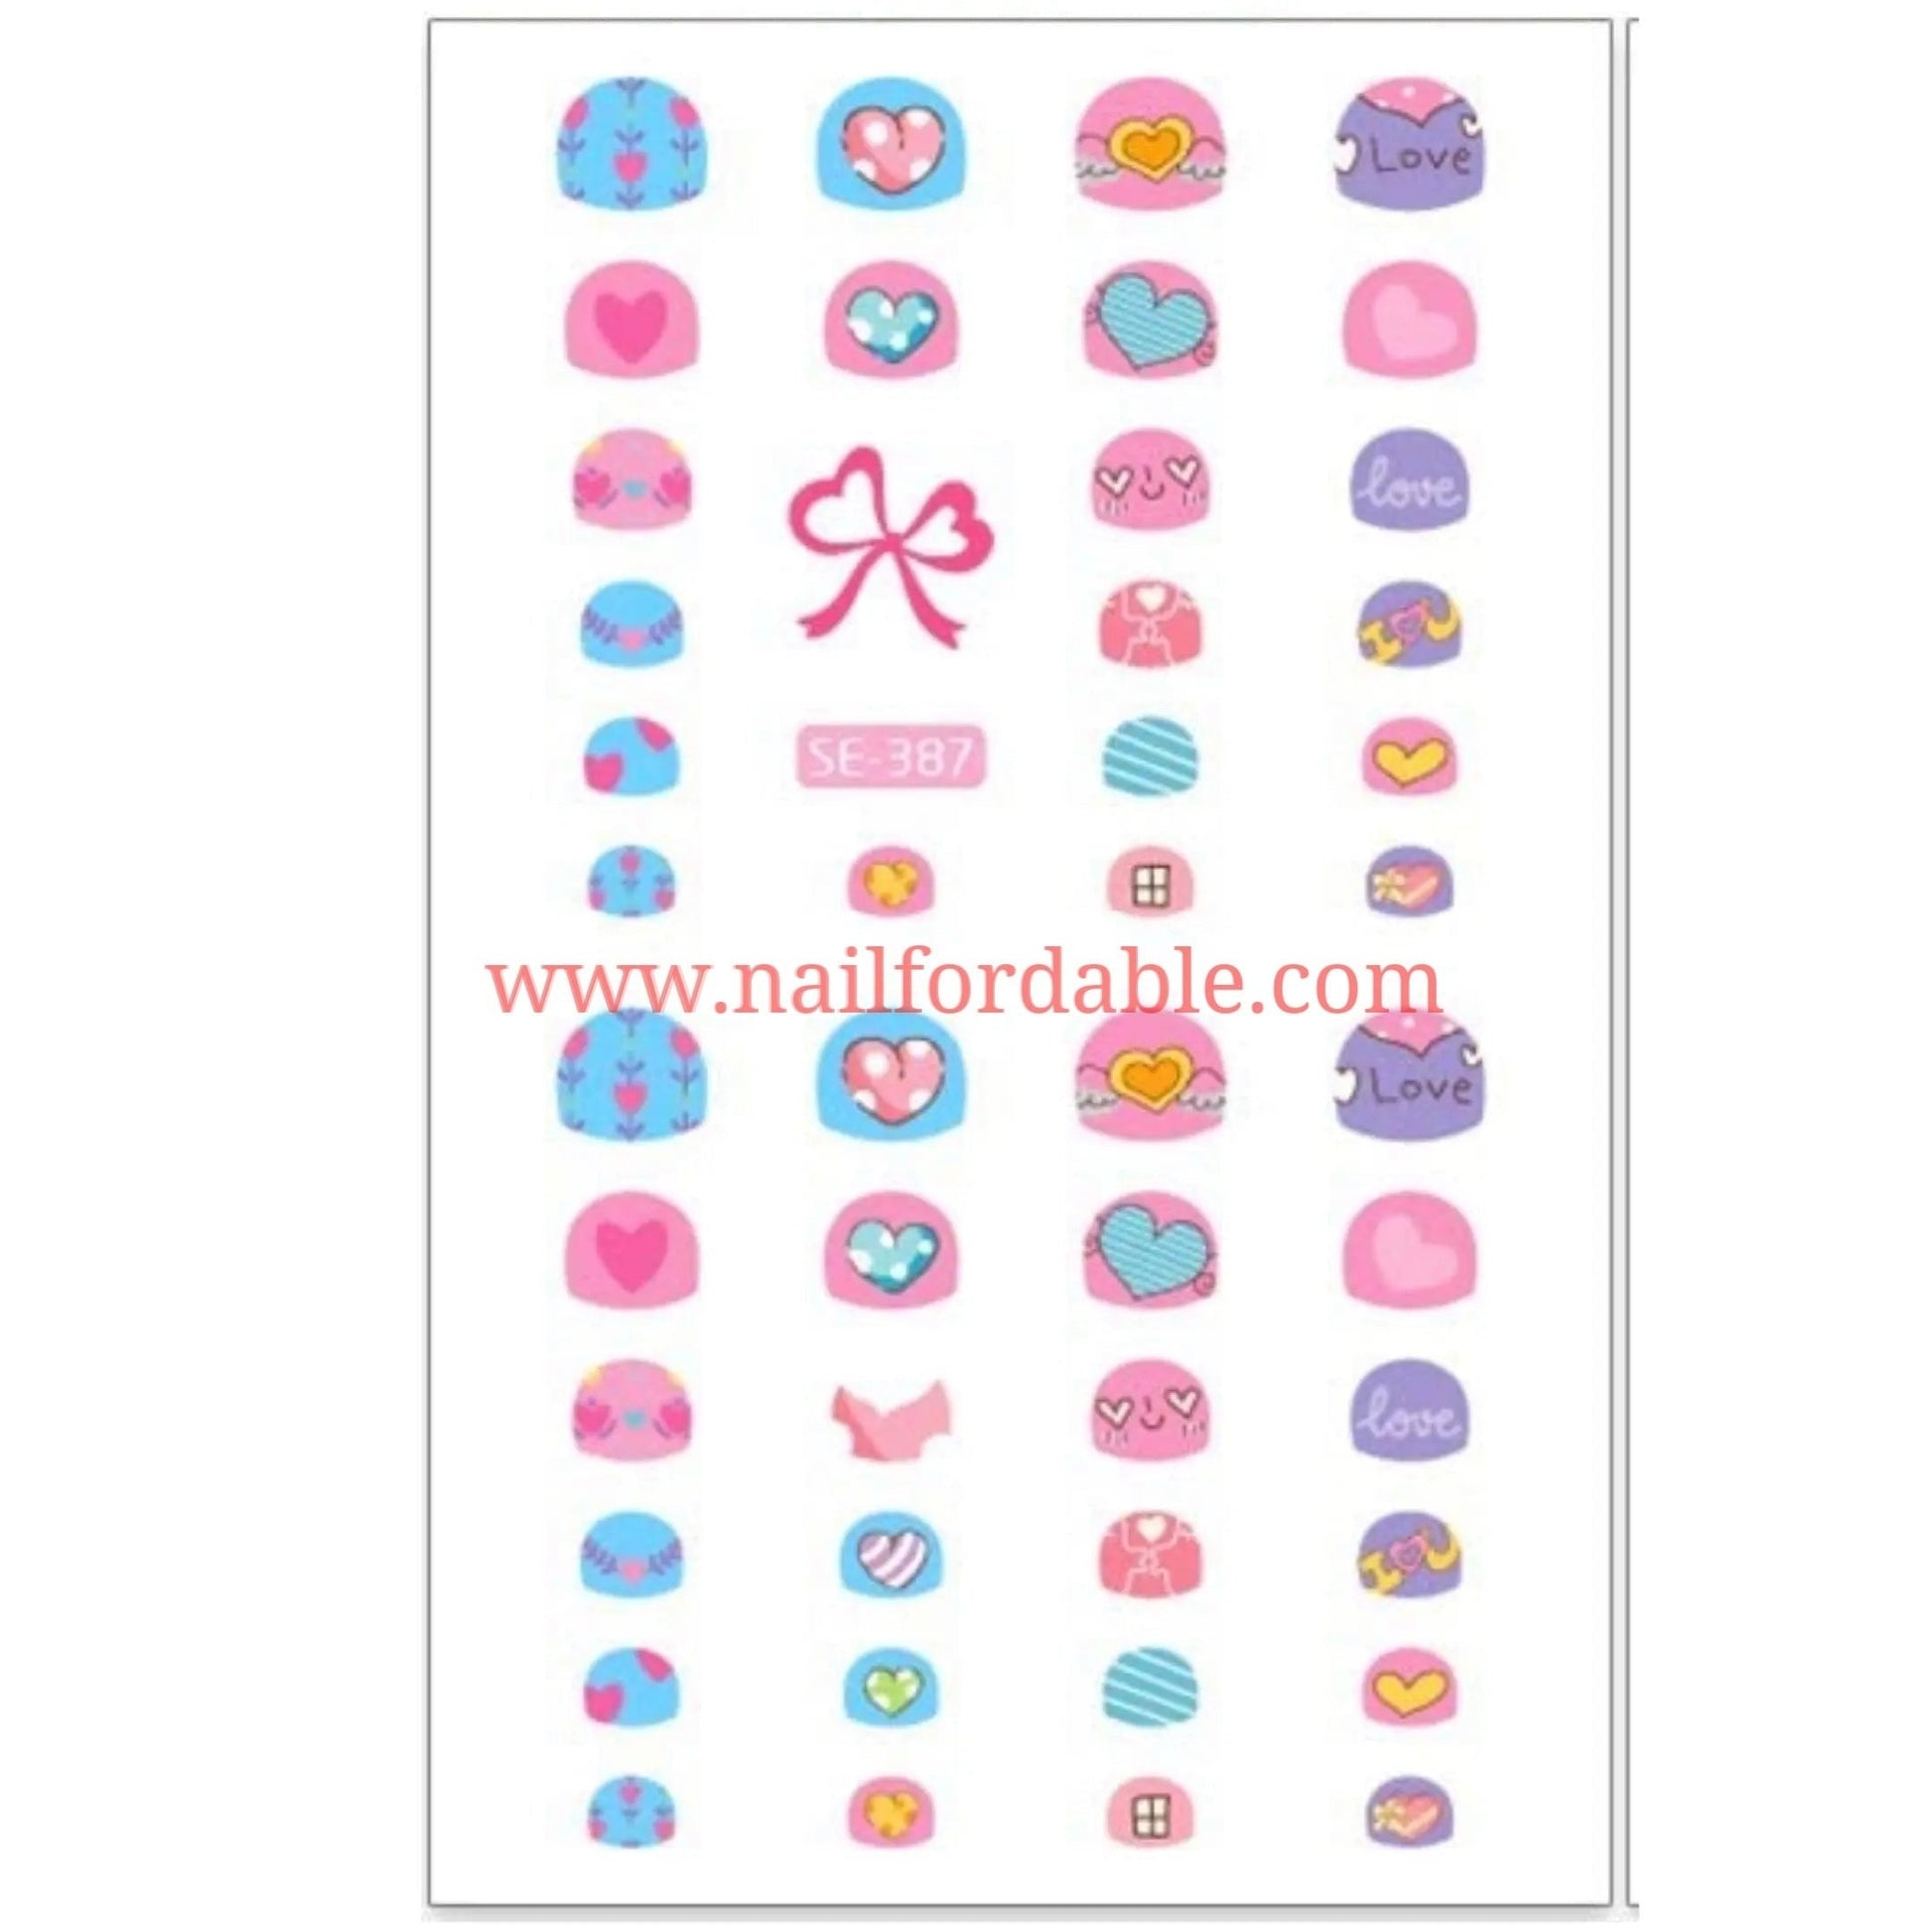 Lovely Nail Stickers Nail Wraps | Semi Cured Gel Wraps | Gel Nail Wraps |Nail Polish | Nail Stickers